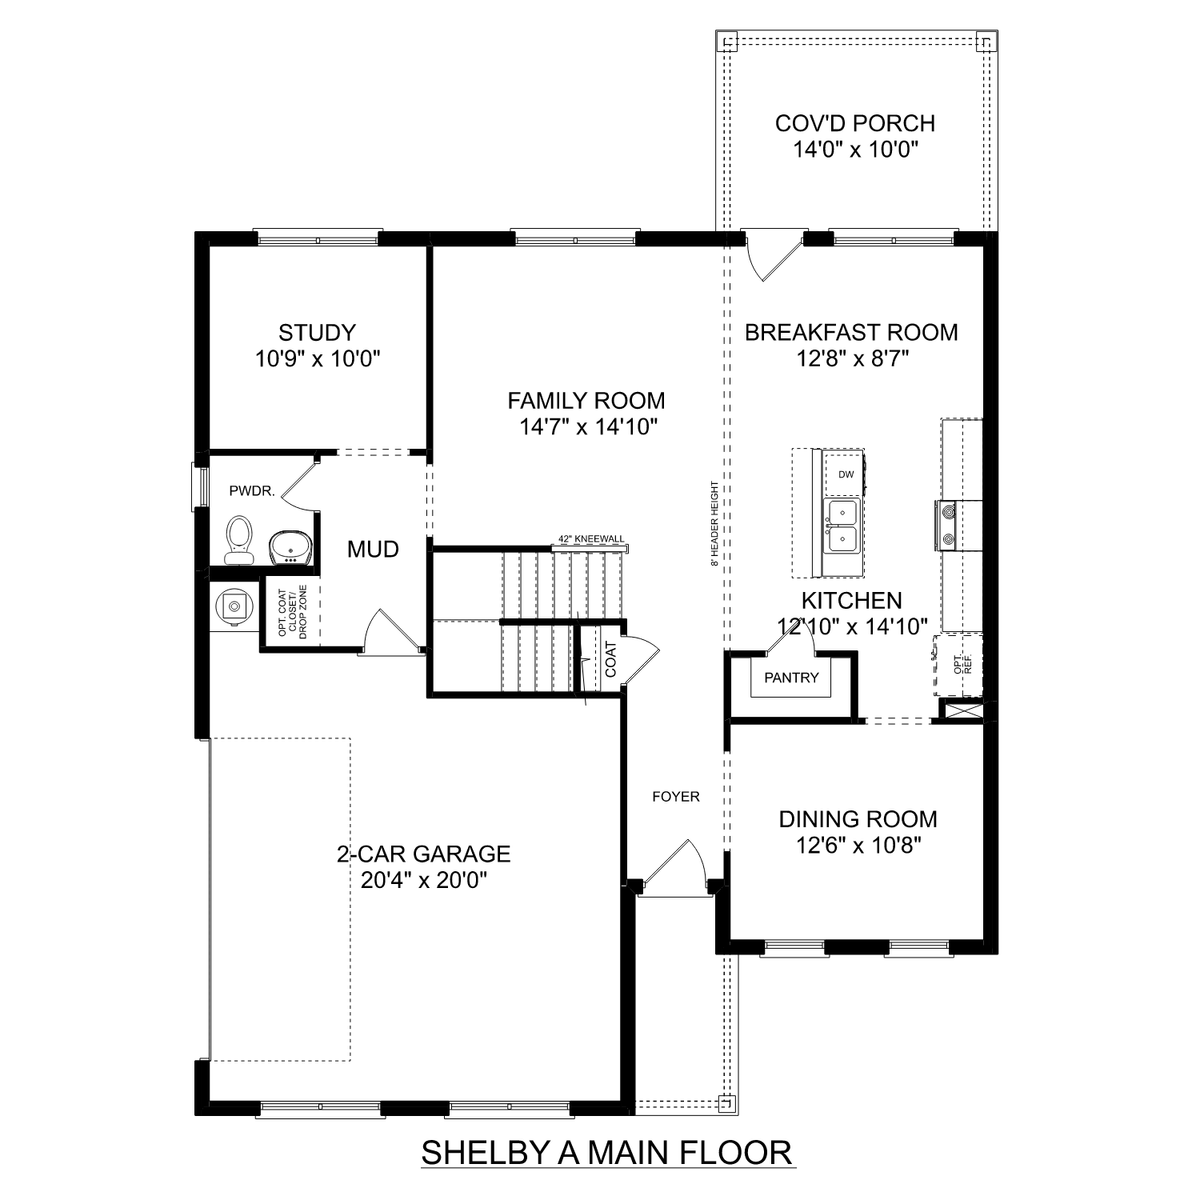 1 - The Shelby A - Side Entry buildable floor plan layout in Davidson Homes' Creek Grove community.